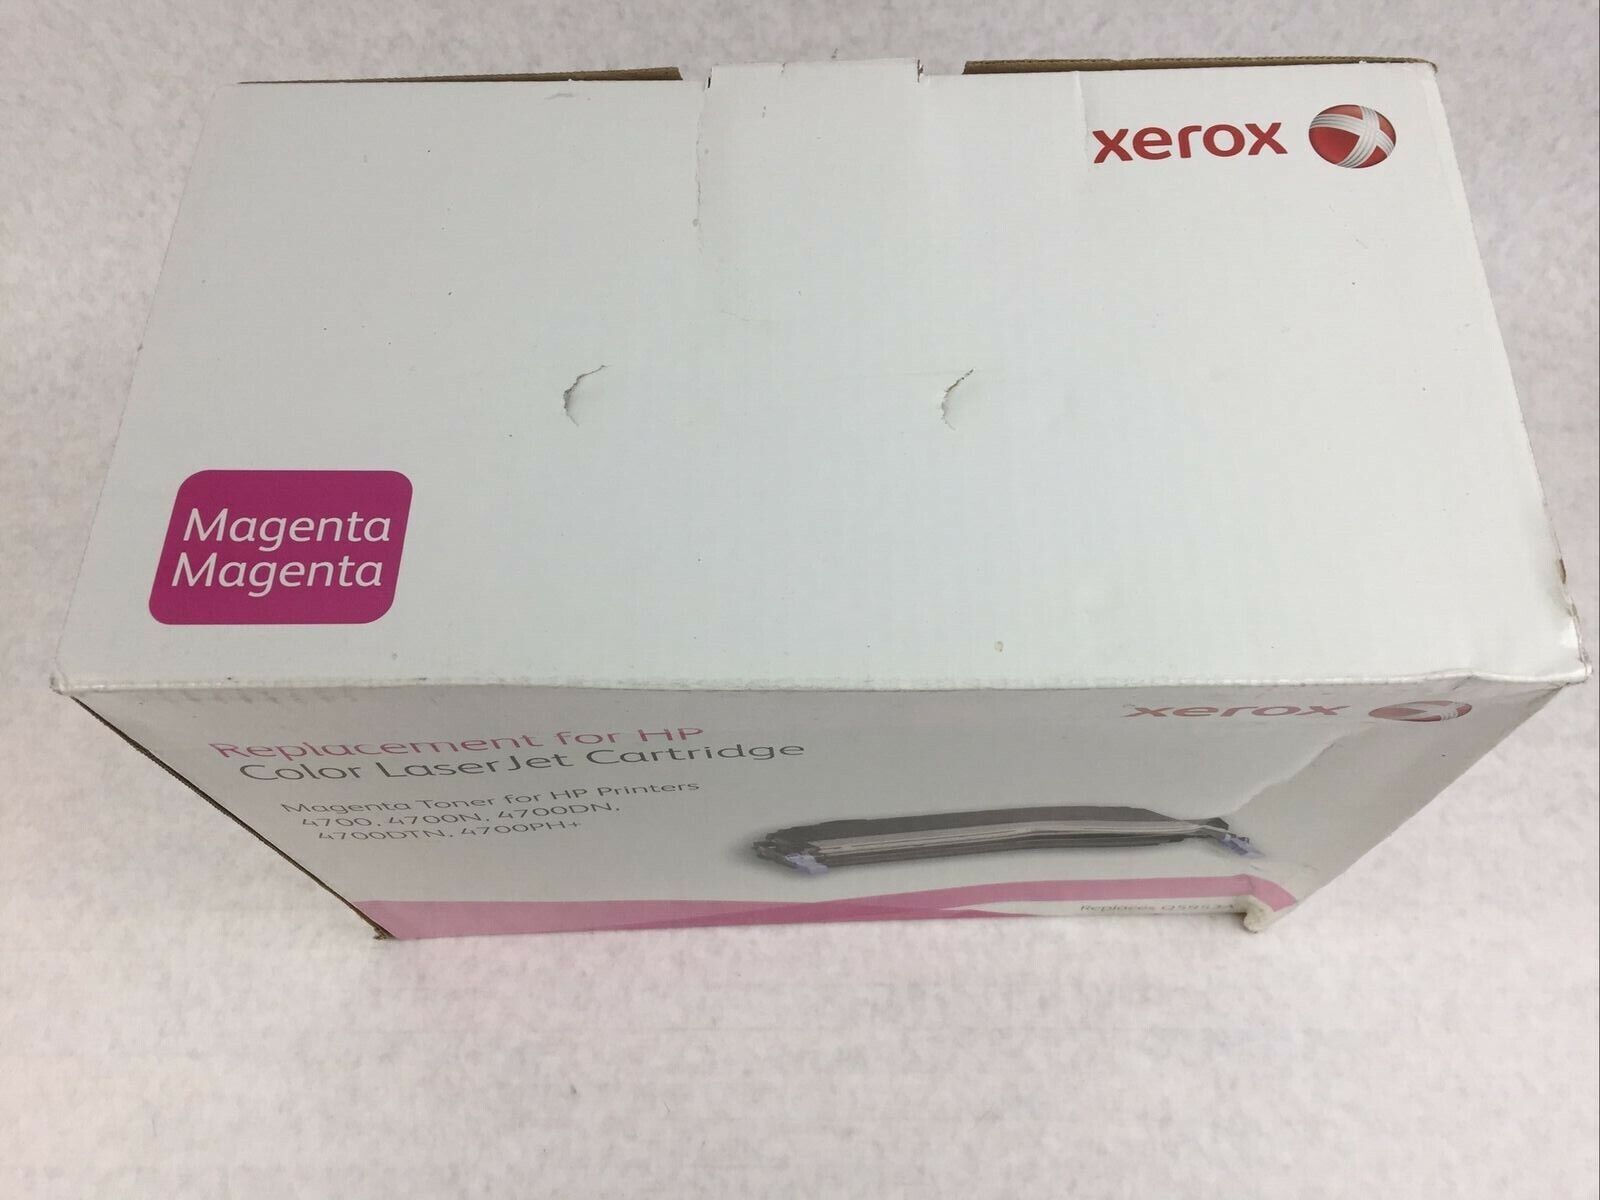 Xerox Replacement Magenta Toner Cartridge for HP 4700  Q5953A  13,100 page yield